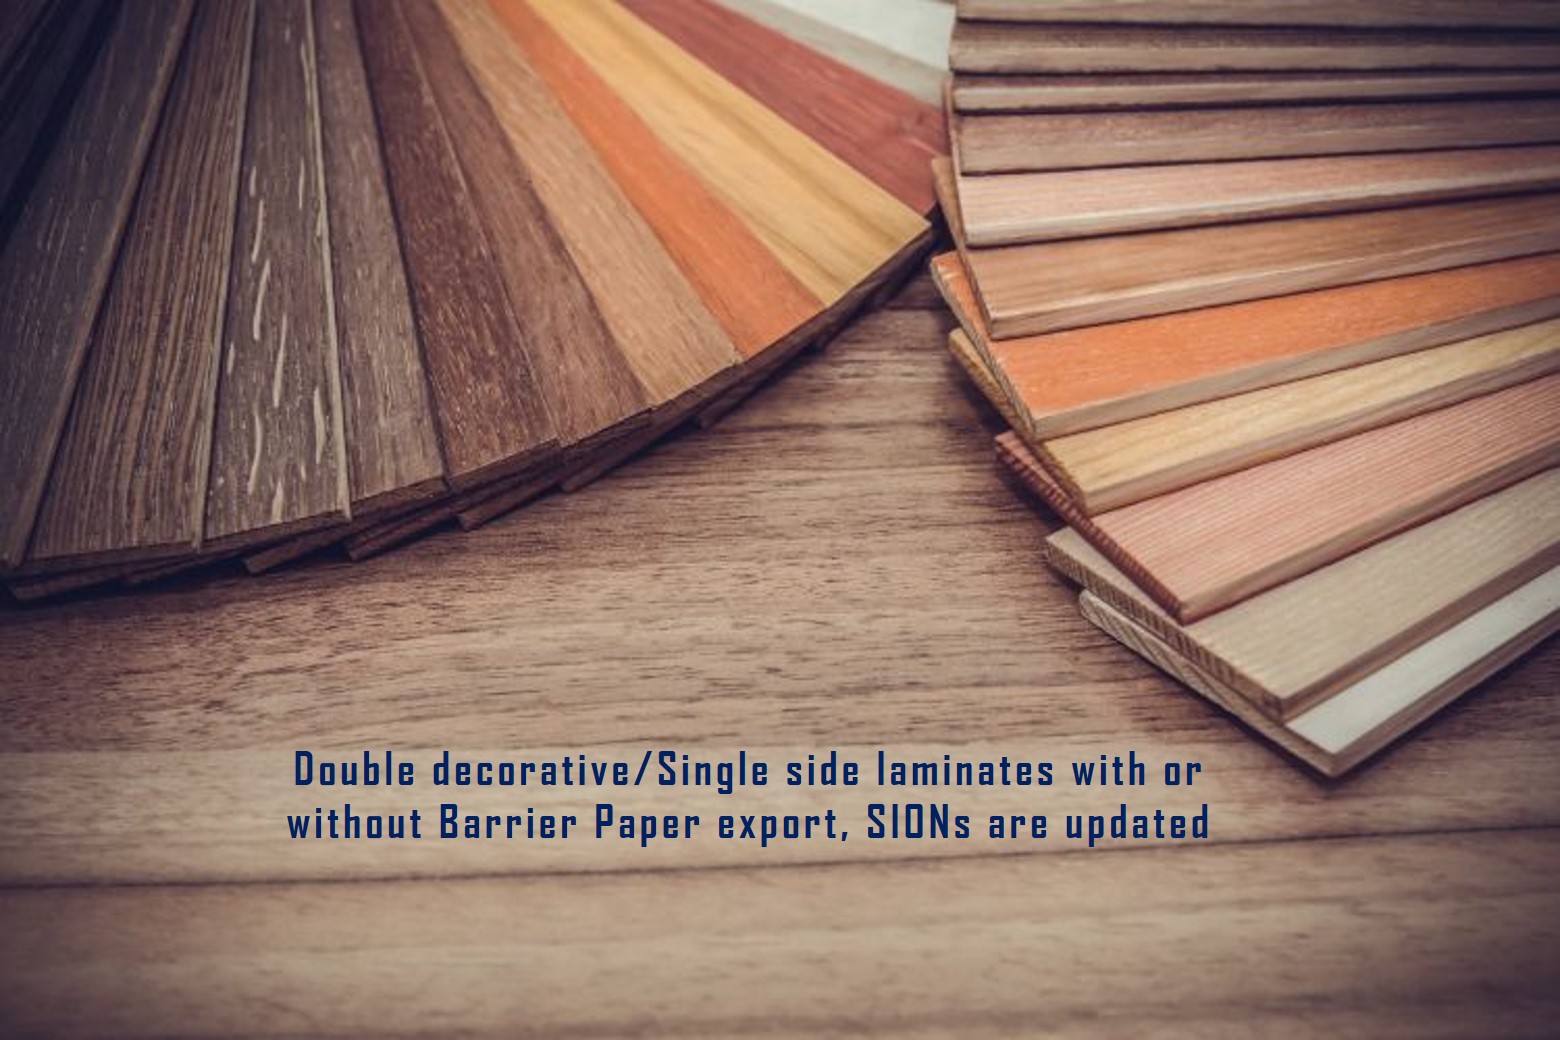 Export of Double Decorative/Single side Laminates with or without Barrier Paper